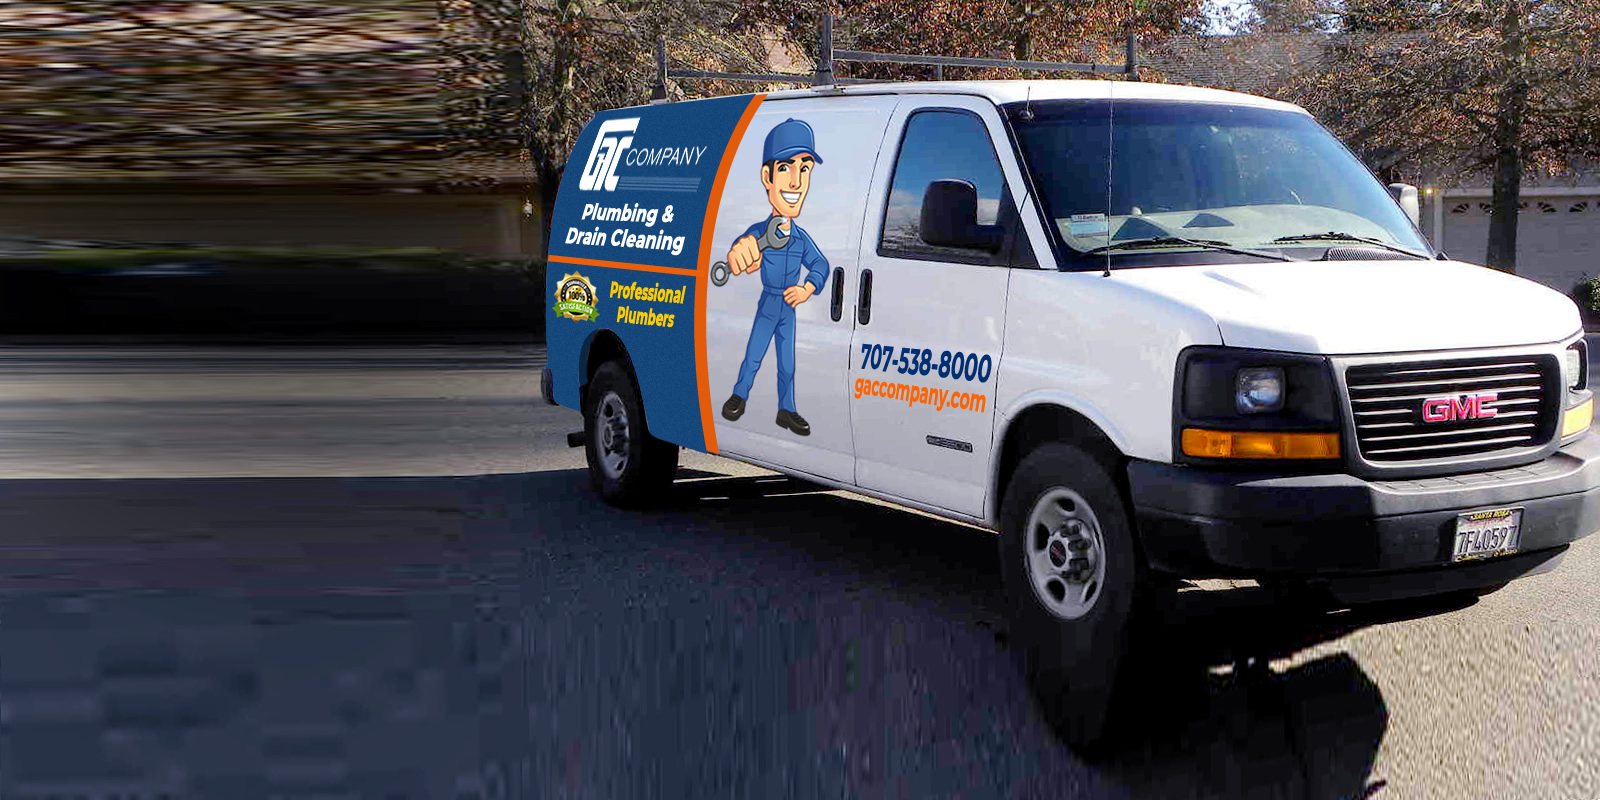 Best Plumbing & Drain Cleaning Services in Cotati